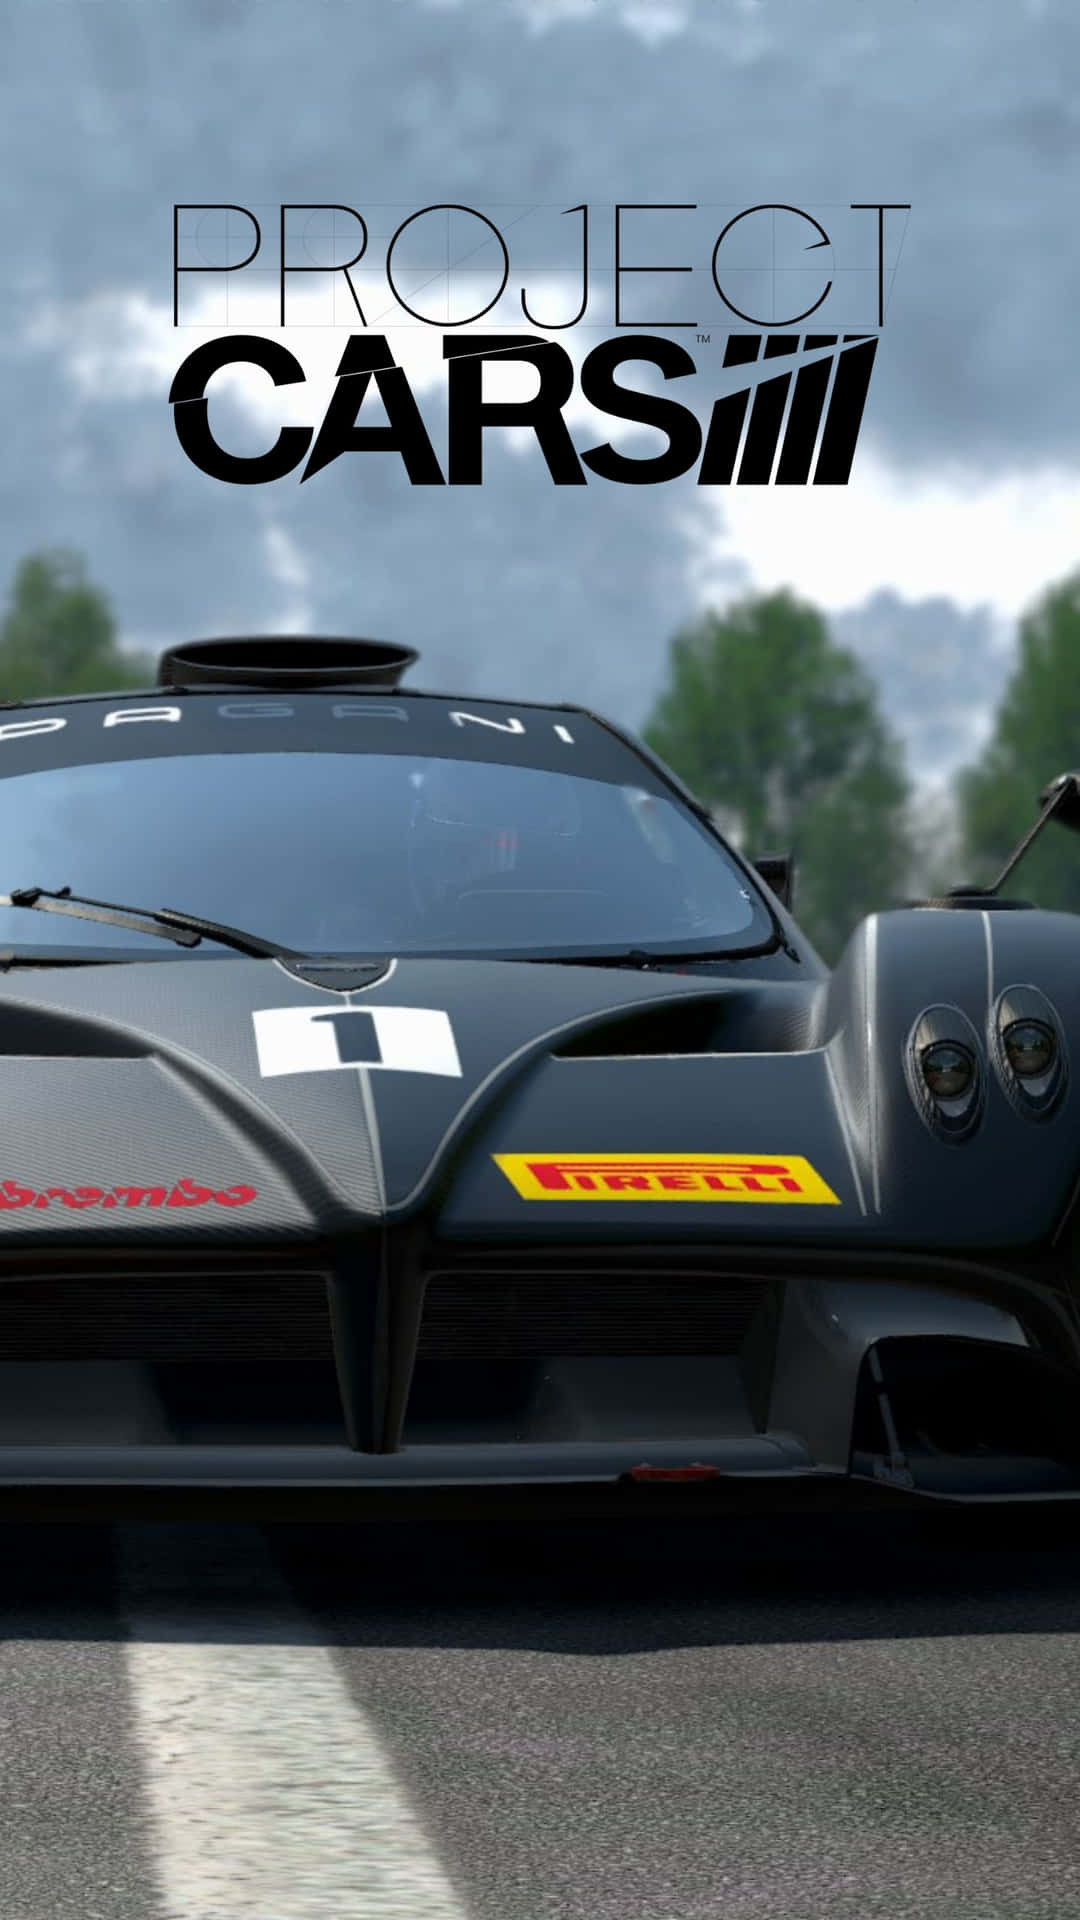 Get the adrenaline rush of real racing with Android Project Cars